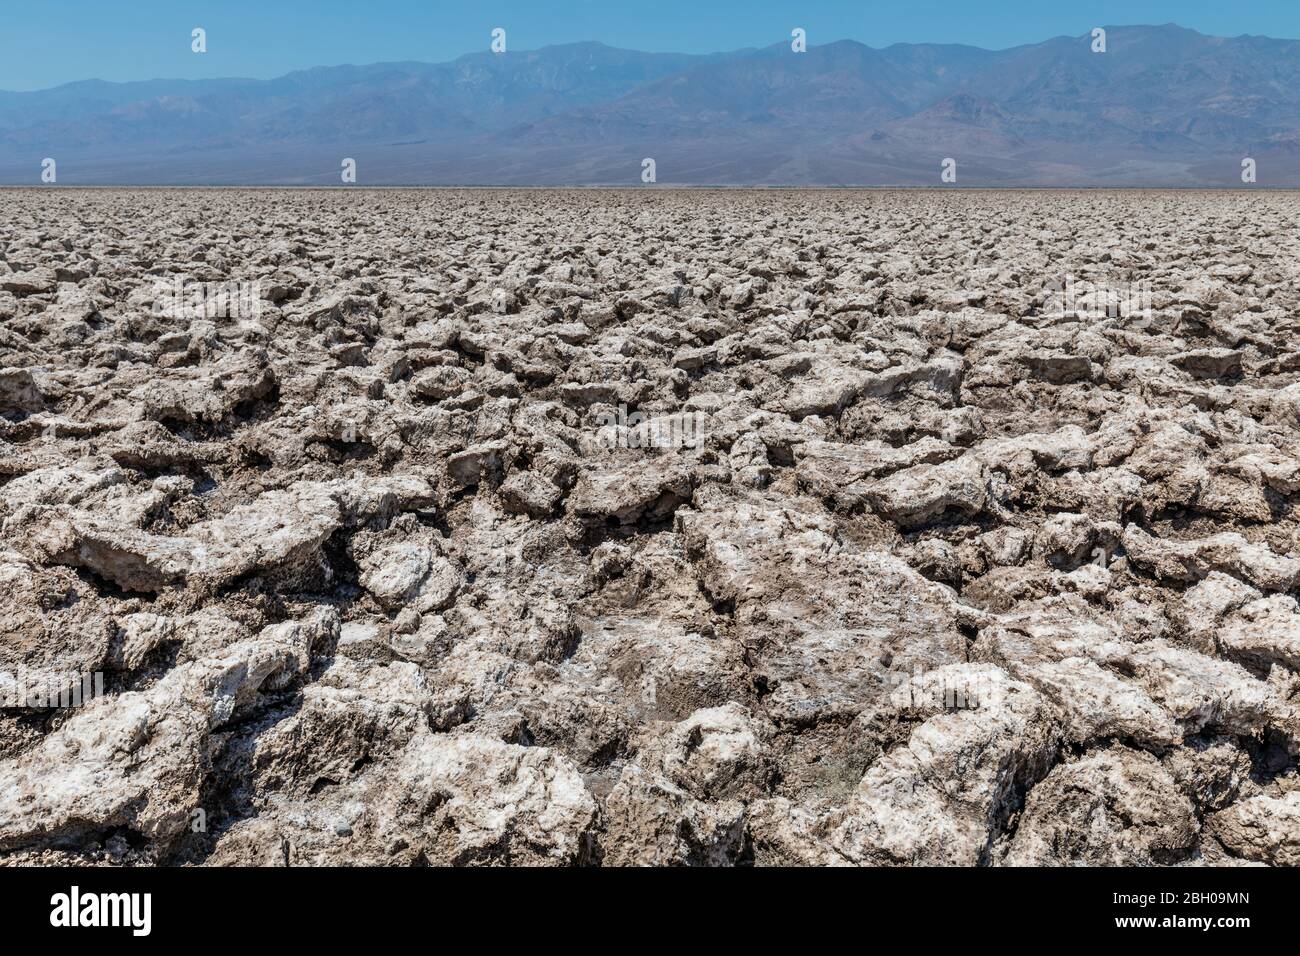 A vast expanse of dried salt called 'The devil's golf course' in the Death Valley, California Stock Photo